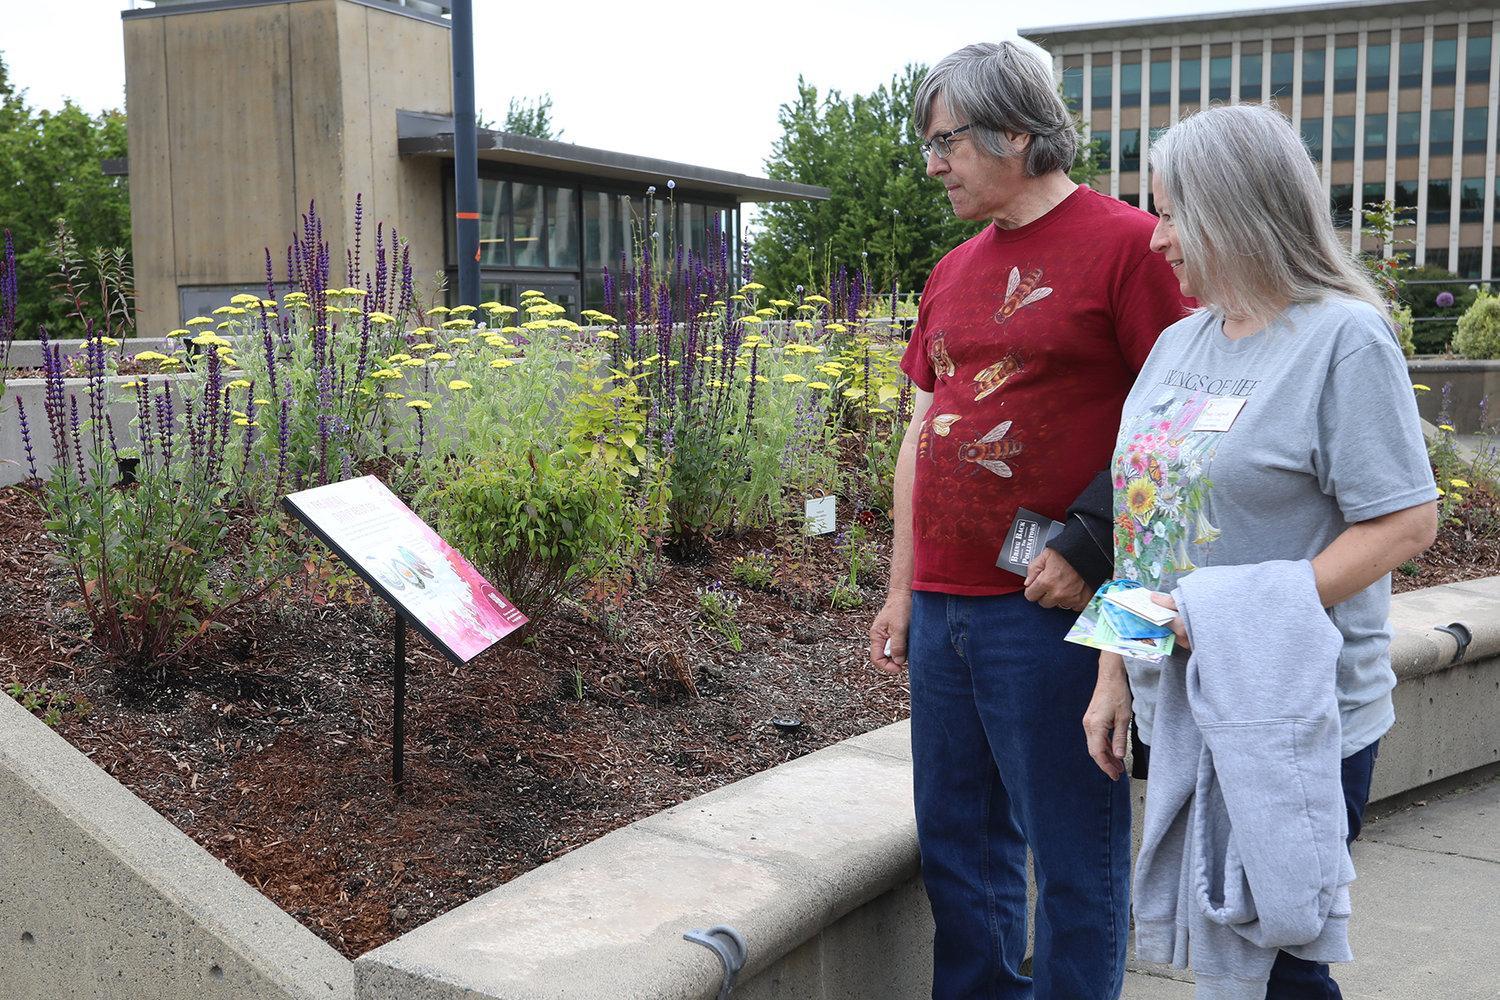 Paul and Penny Longwell of Olympia at the June 22, 2022 opening of the Capitol Campus Pollinator Garden. Penny is a gardener and Paul a beekeeper